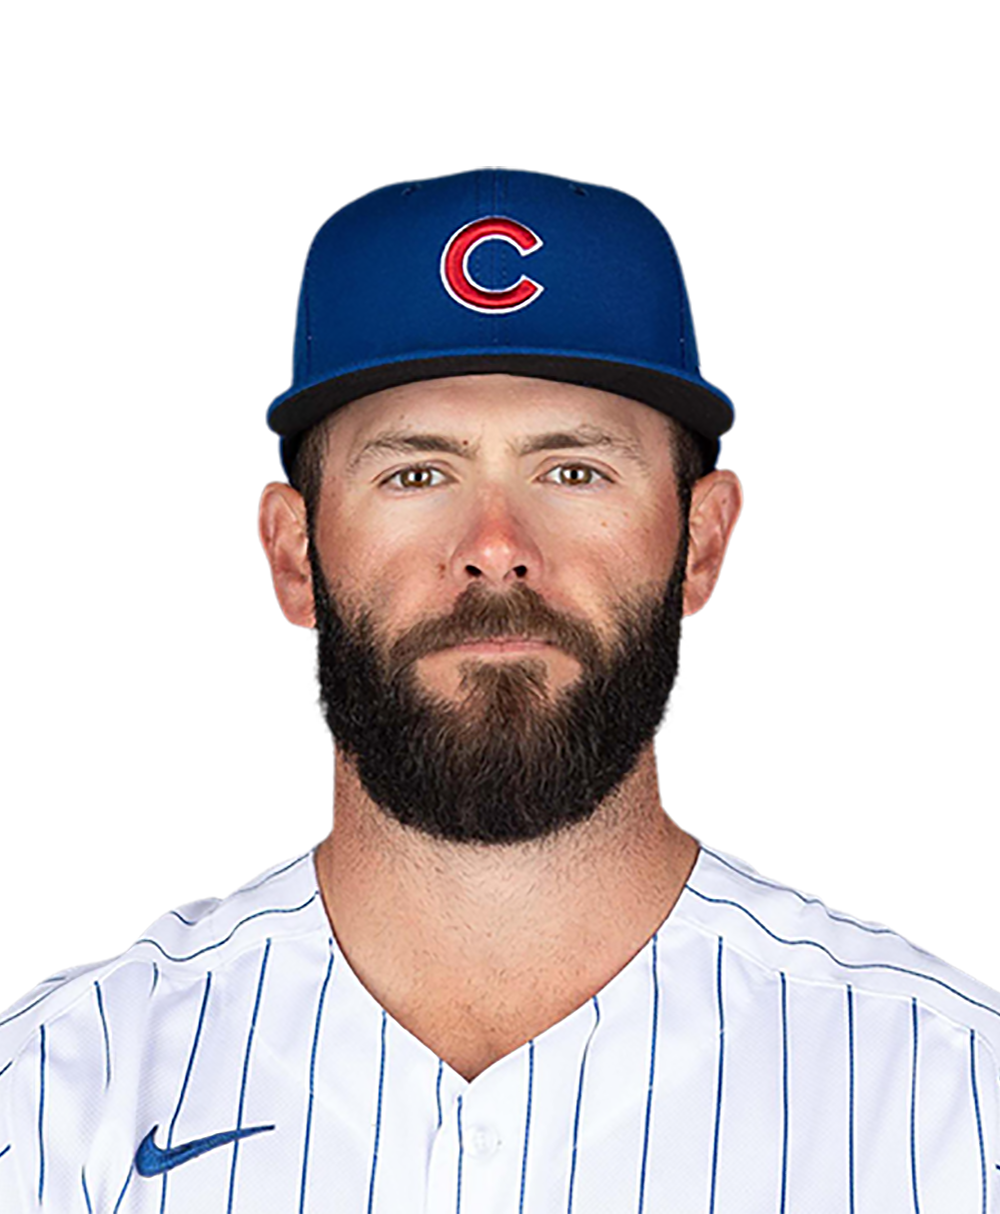 MLB News: Padres sign Jake Arrieta for some reason - Beyond the Box Score